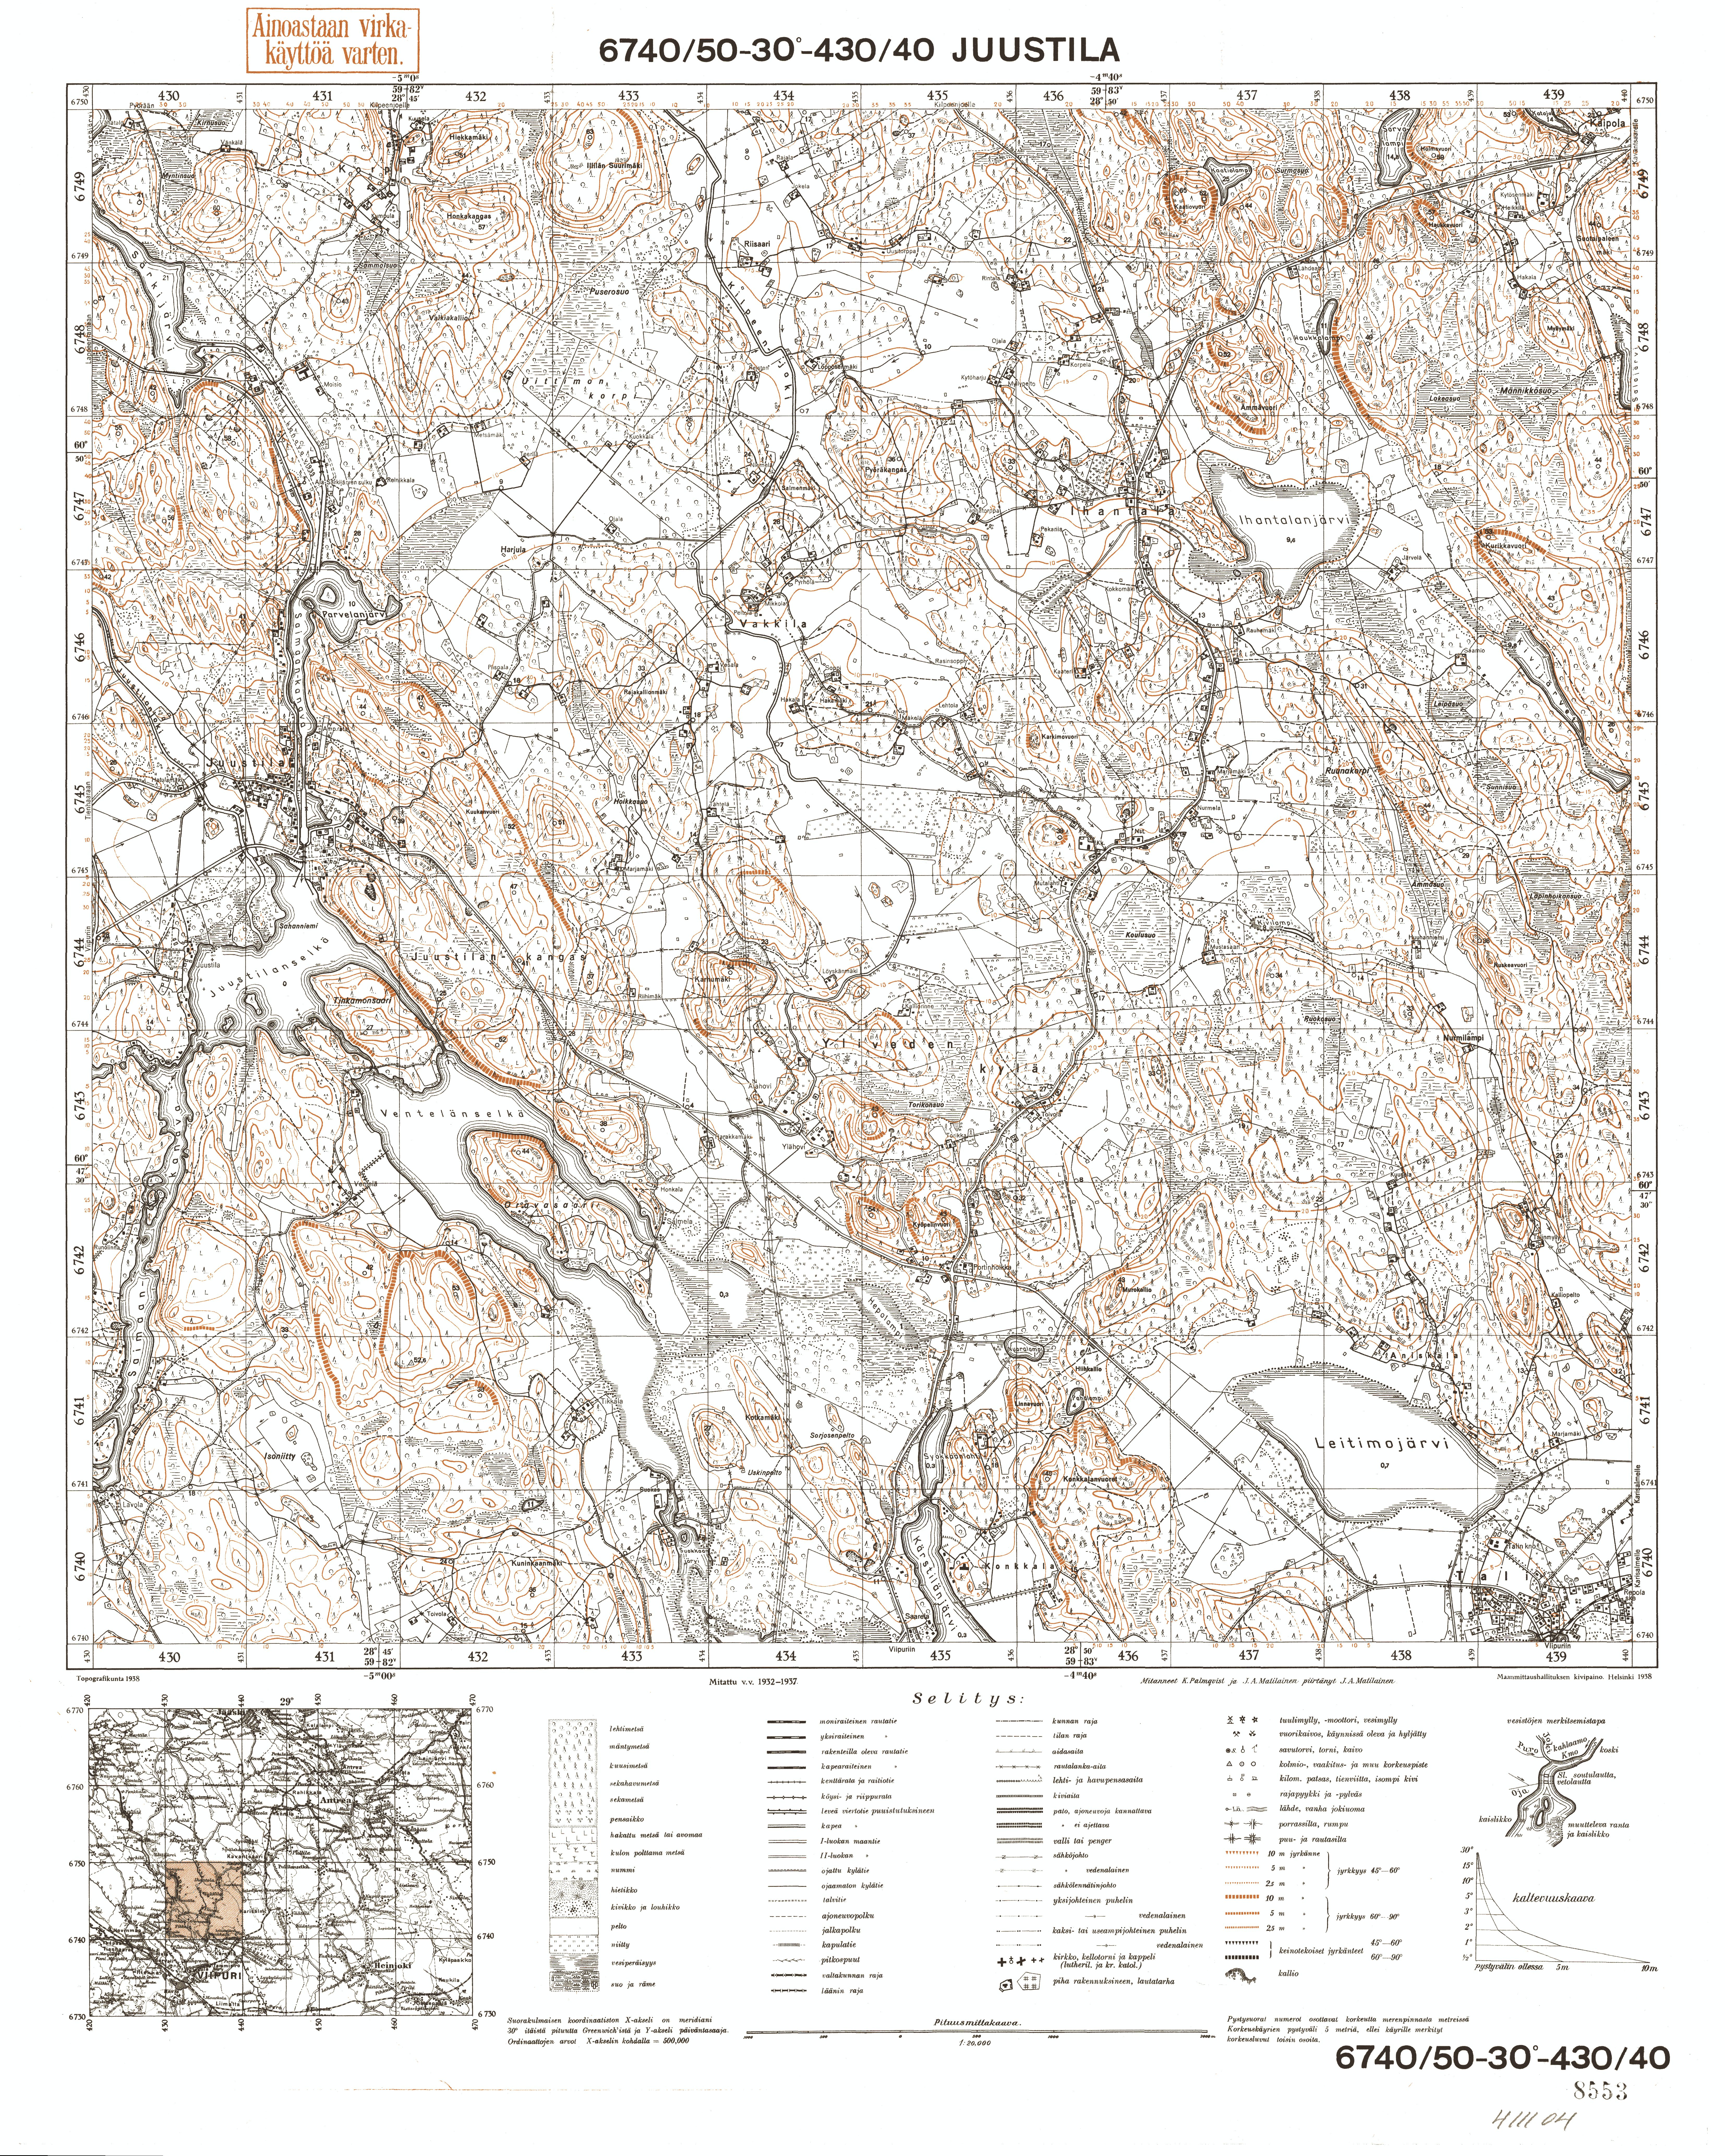 Brusnitšnoje. Juustila. Topografikartta 411104. Topographic map from 1940. Use the zooming tool to explore in higher level of detail. Obtain as a quality print or high resolution image